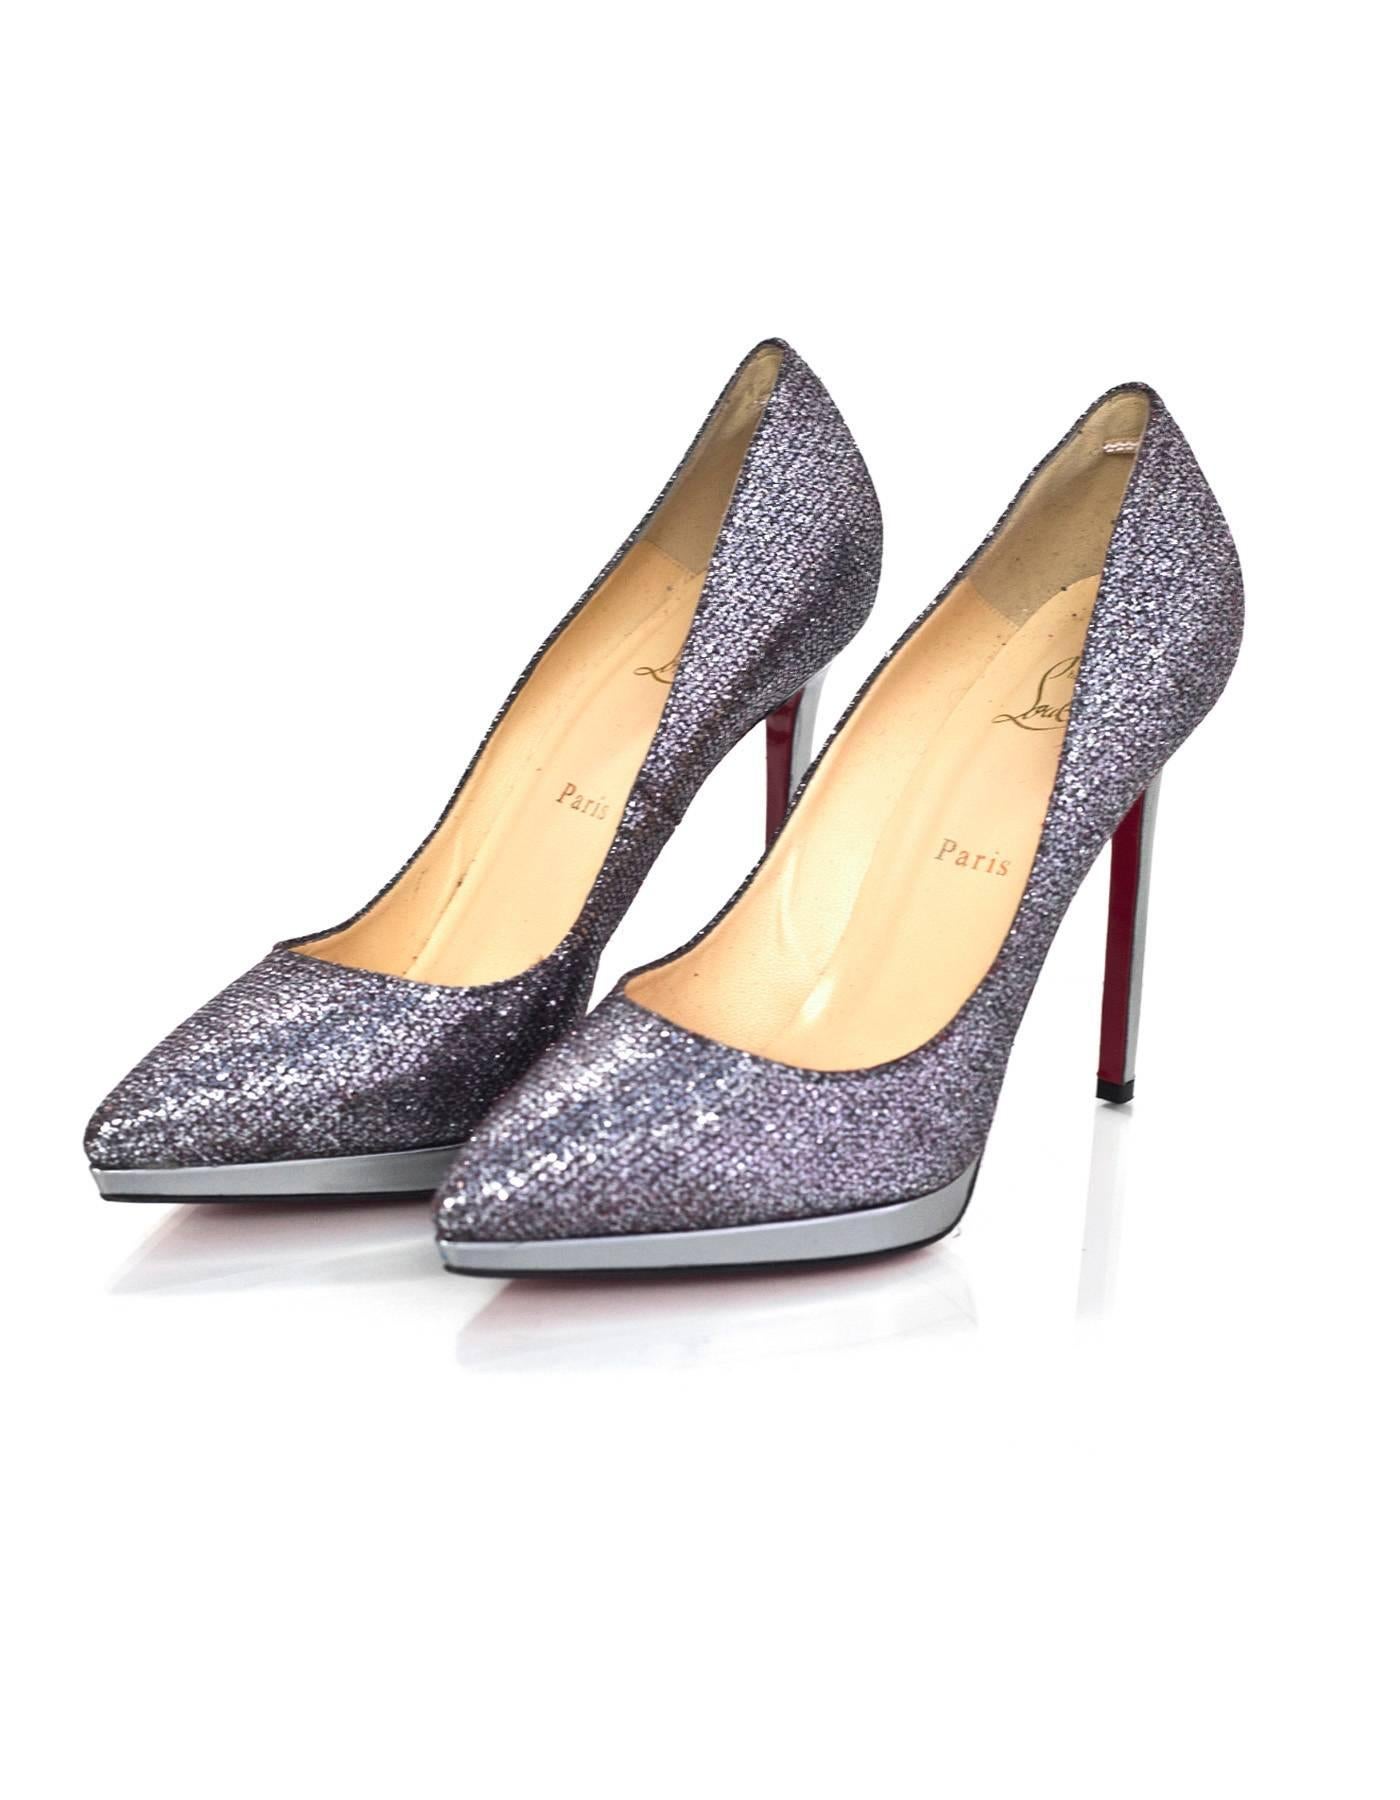 Christian Louboutin Silver Glitter Pigalle Plato 120 sz 41

Made In: Italy
Color: Silver 624/ Anthracite 1
Materials: Leather & textile
Closure/Opening: Slide on
Sole Stamp: Christian Louboutin MADE IN ITALY 41
Retail Price: $675 + tax
Overall